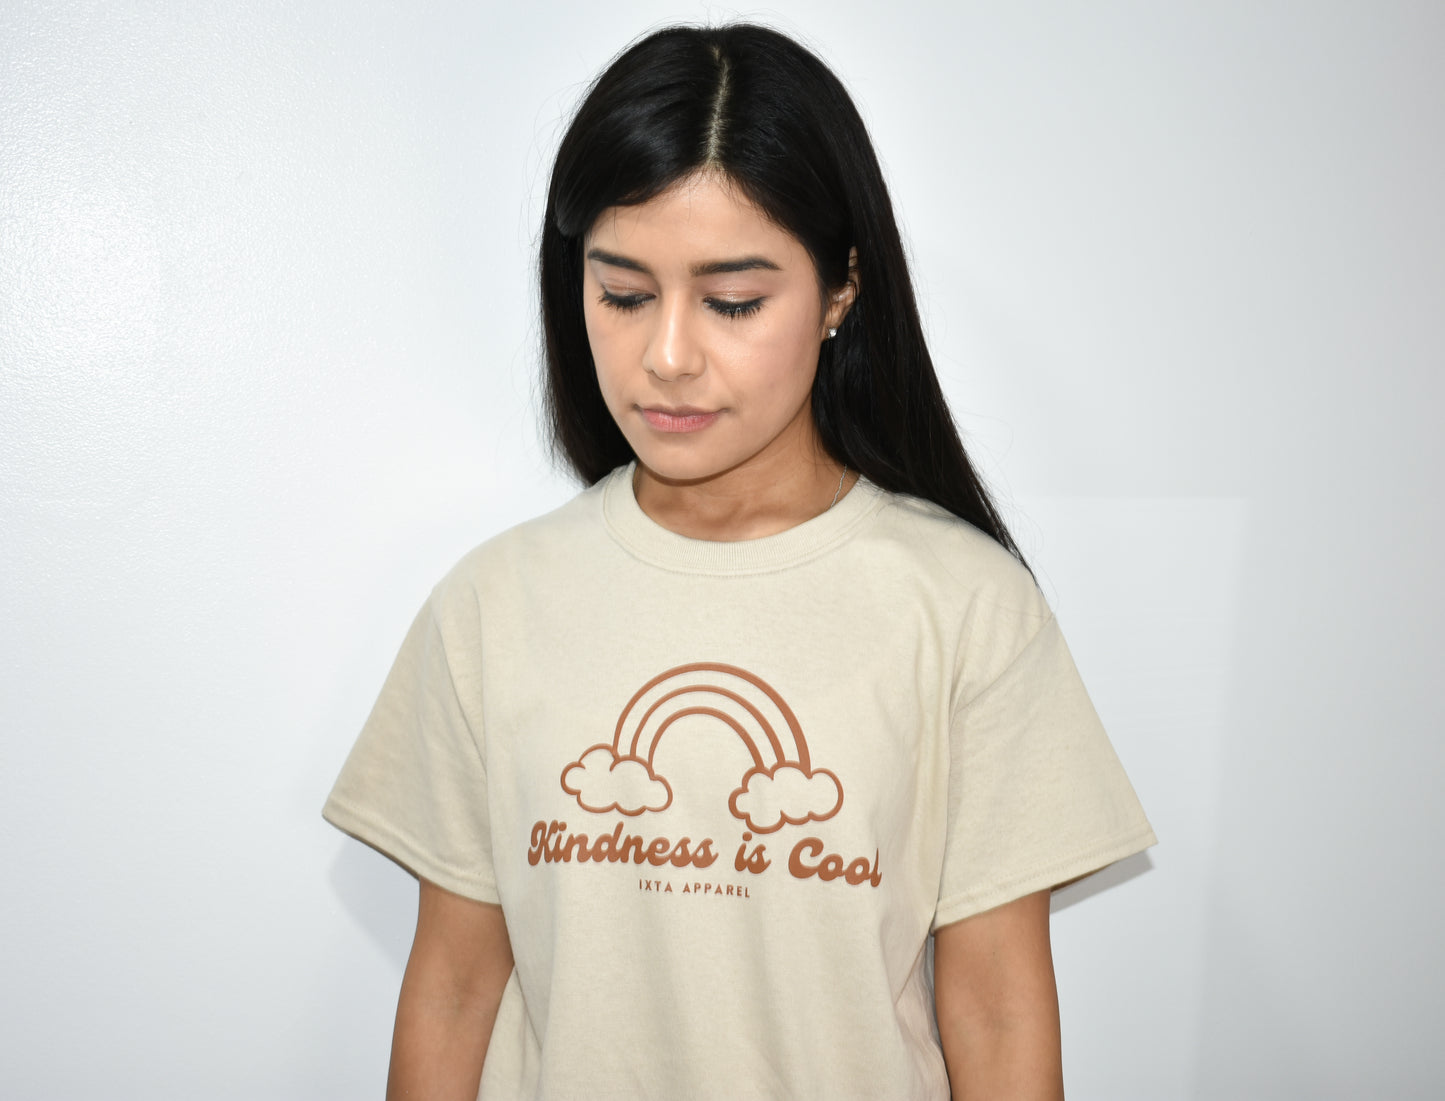 Kindness is Cool T-shirt